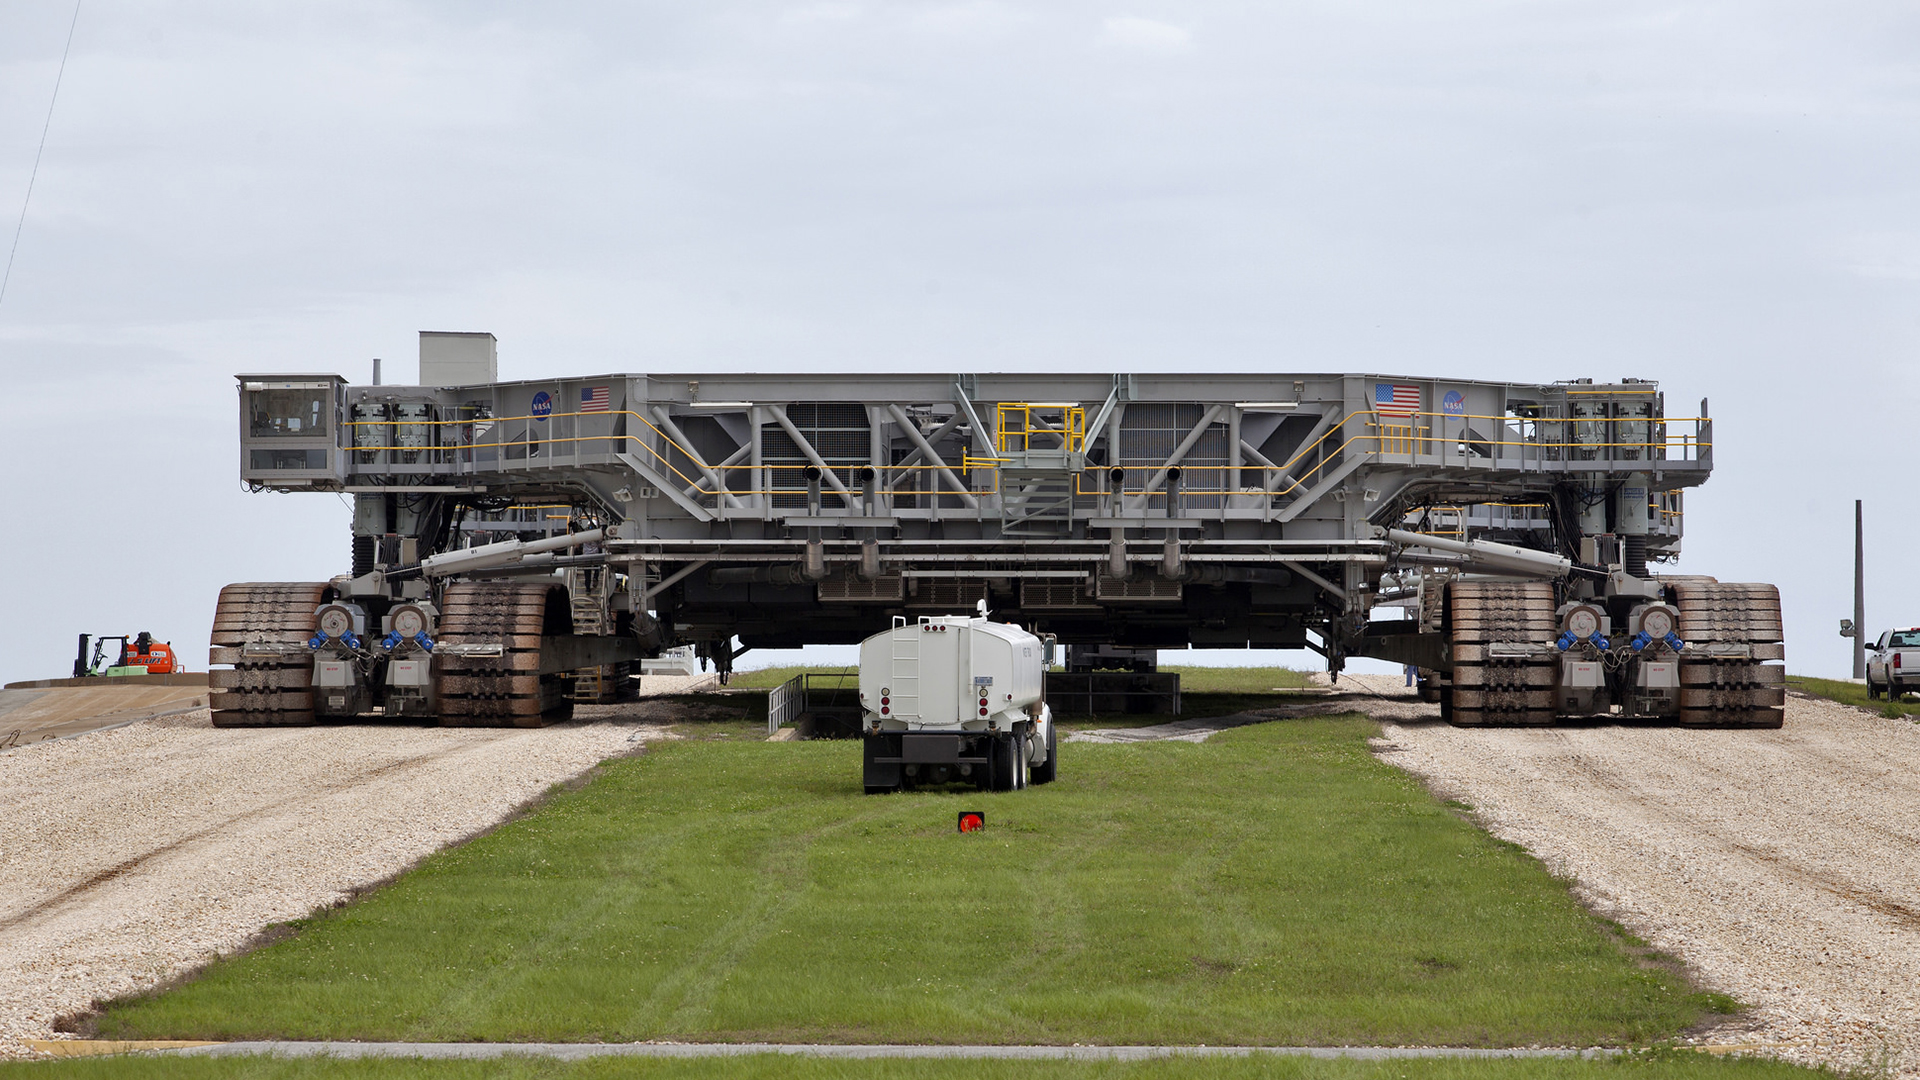 Crawler-transporter 2 (CT-2) moves slowly up the ramp to the surface of Launch Pad 39B for a fit check on May 22, 2018, at NASA's Kennedy Space Center in Florida.